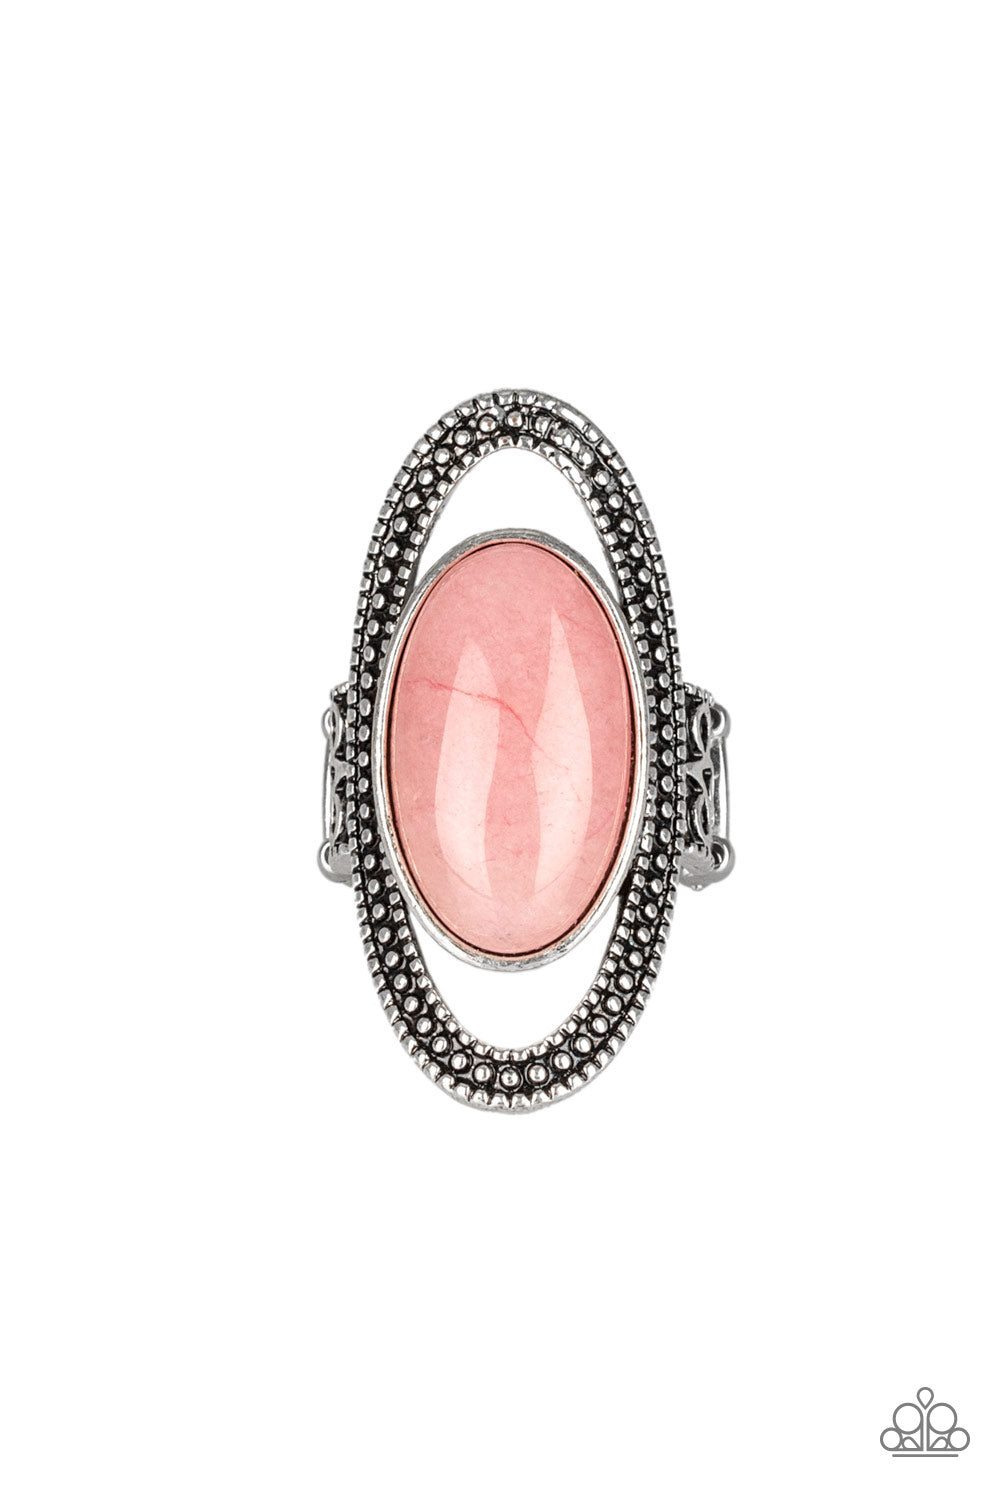 WESTERN ROYALTY - PINK ROSE QUARTZ OVAL NATURAL STONE RING